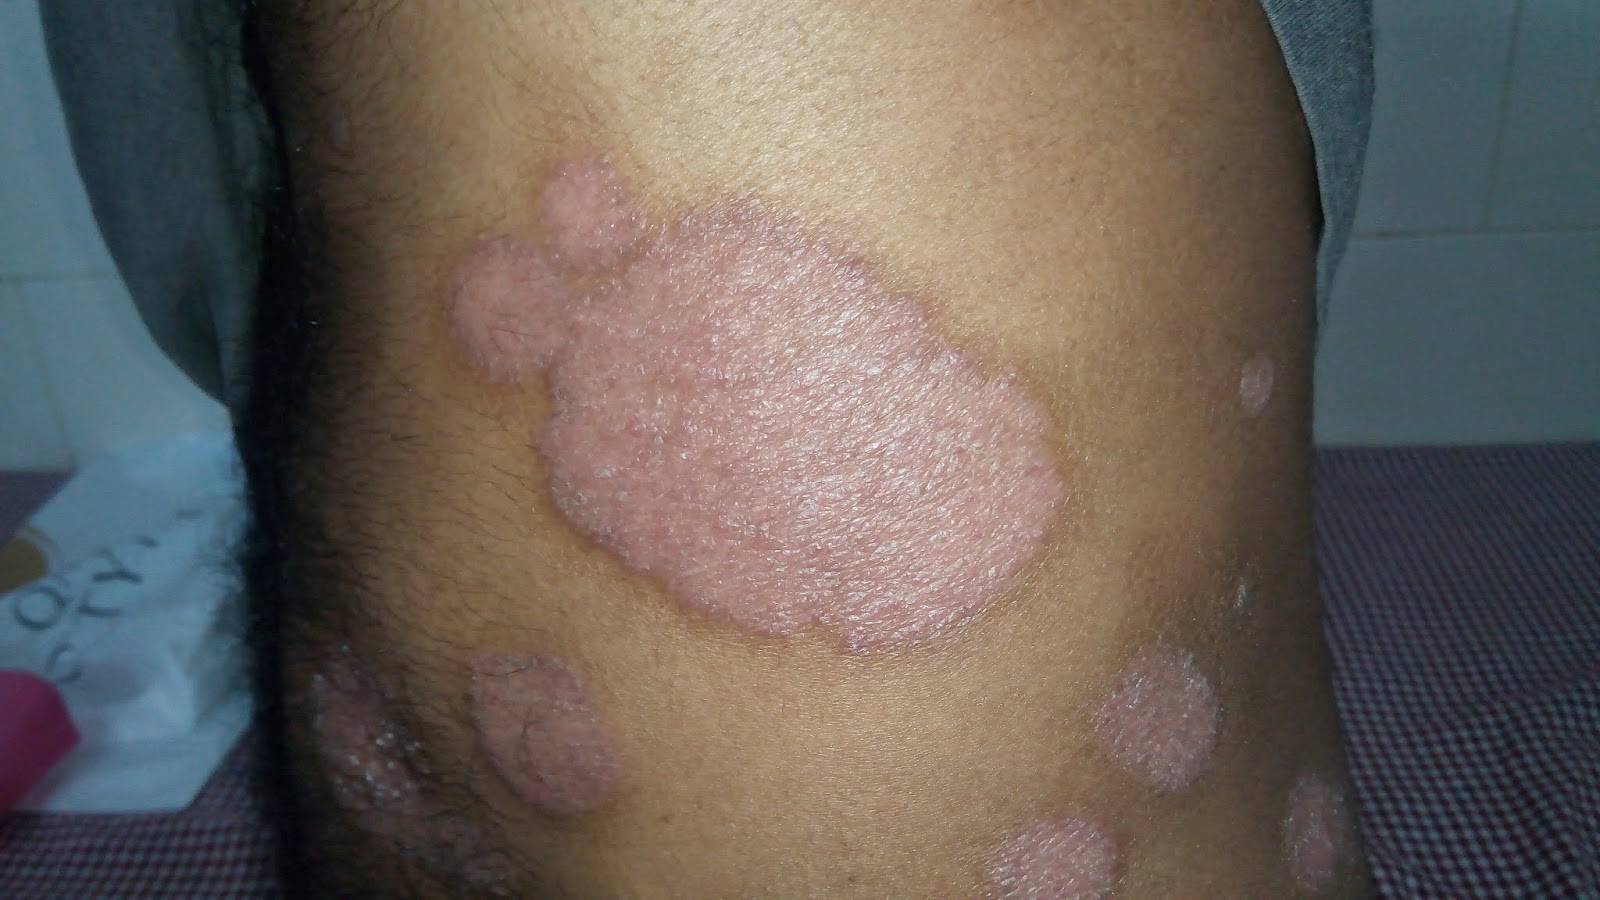 can psoriasis be cured by allopathy